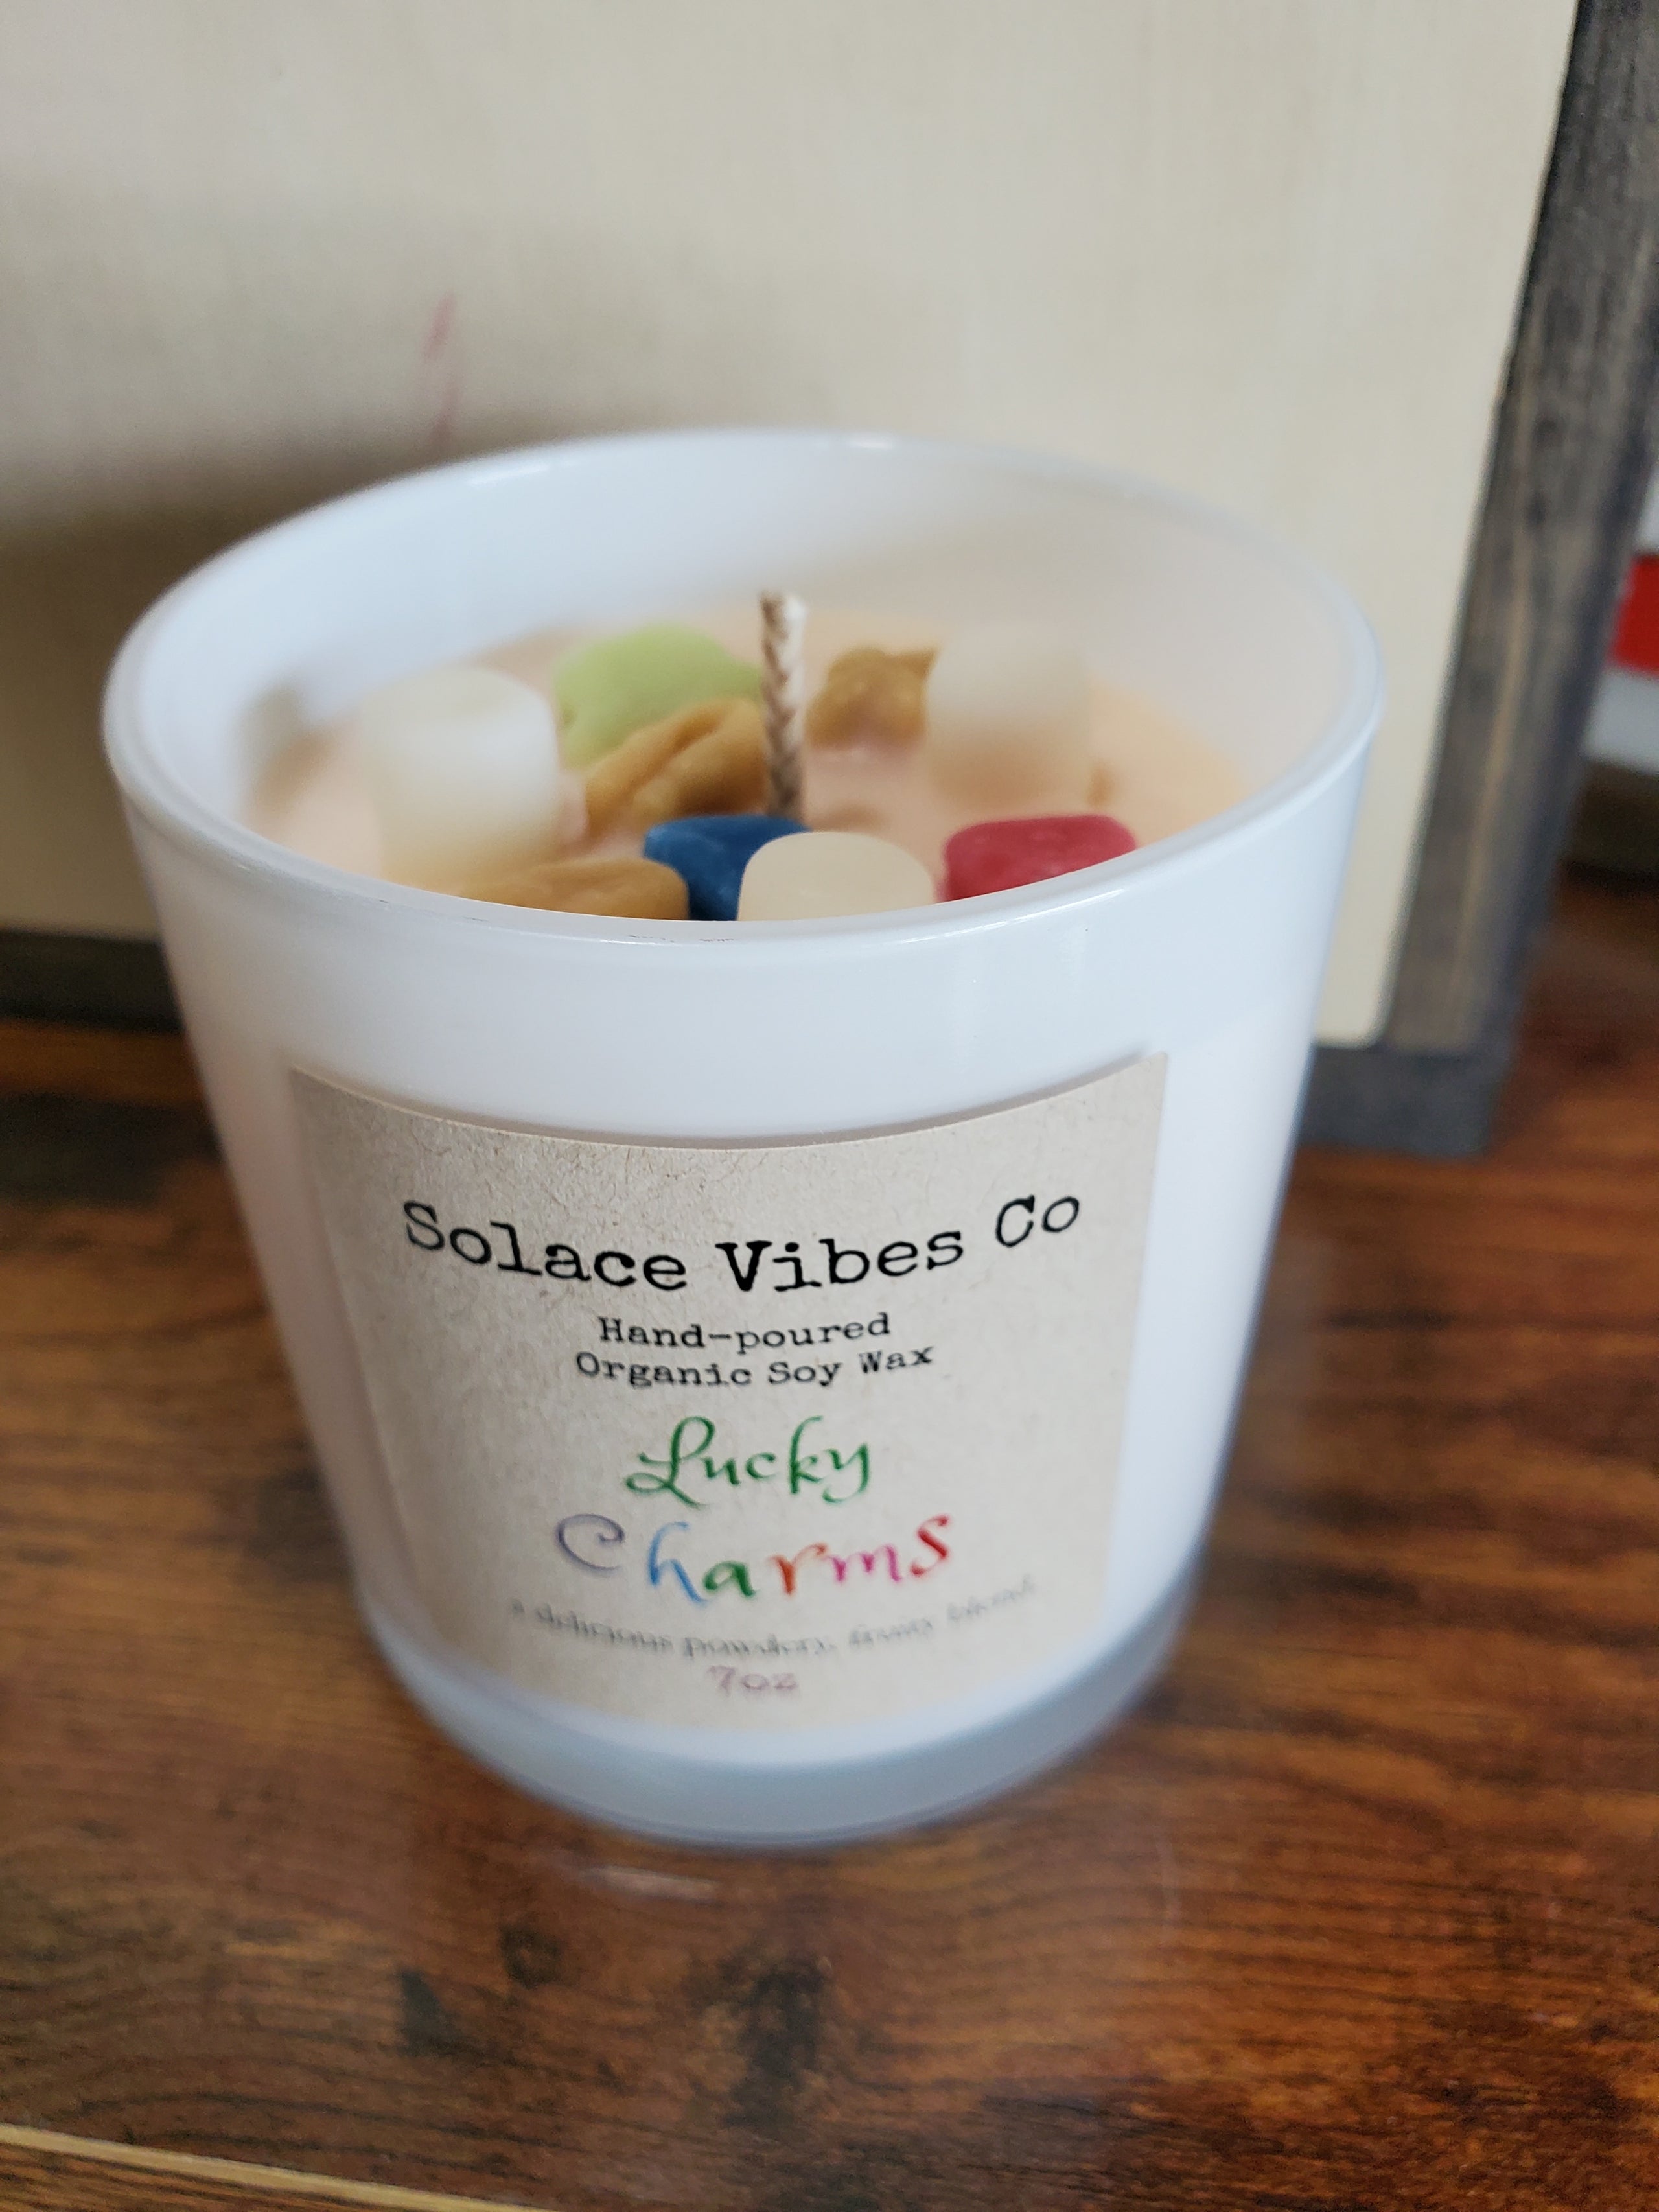 Solace Vibes Co - Hand Poured, Organic Soy Wax Candles (60 hour burn time)